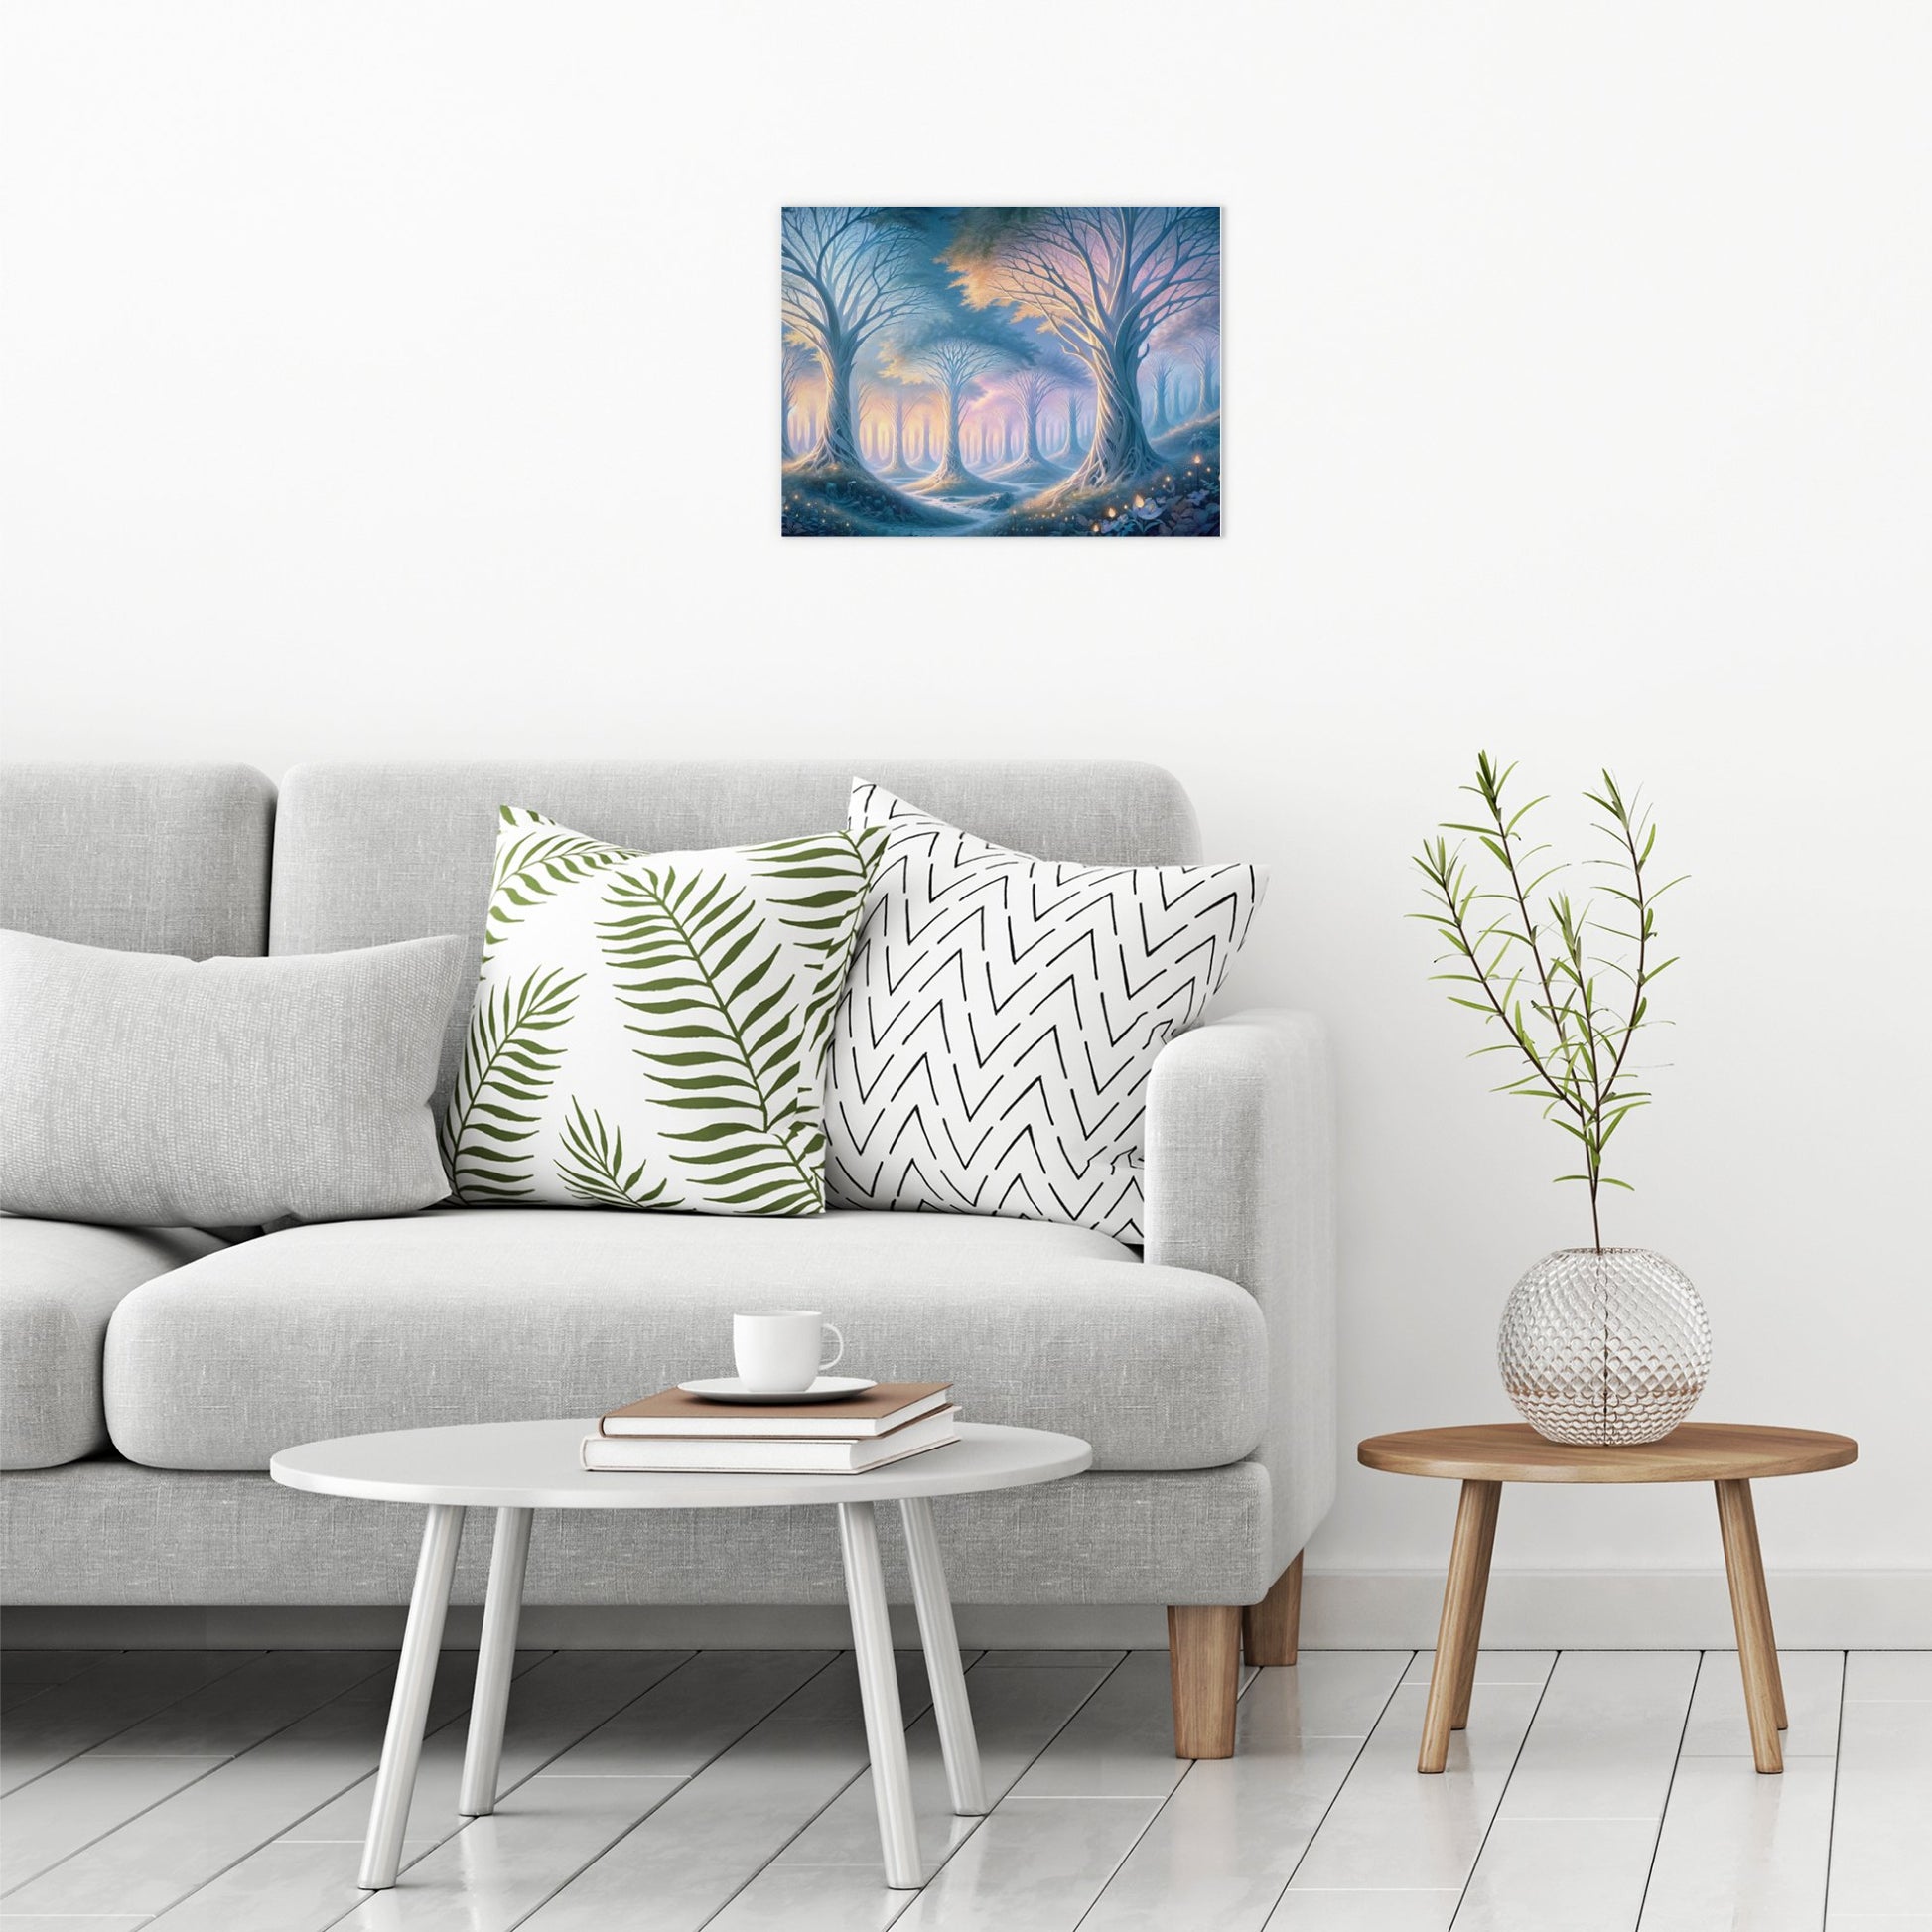 A contemporary modern room view showing a medium size metal art poster display plate with printed design of a Mystical Forest